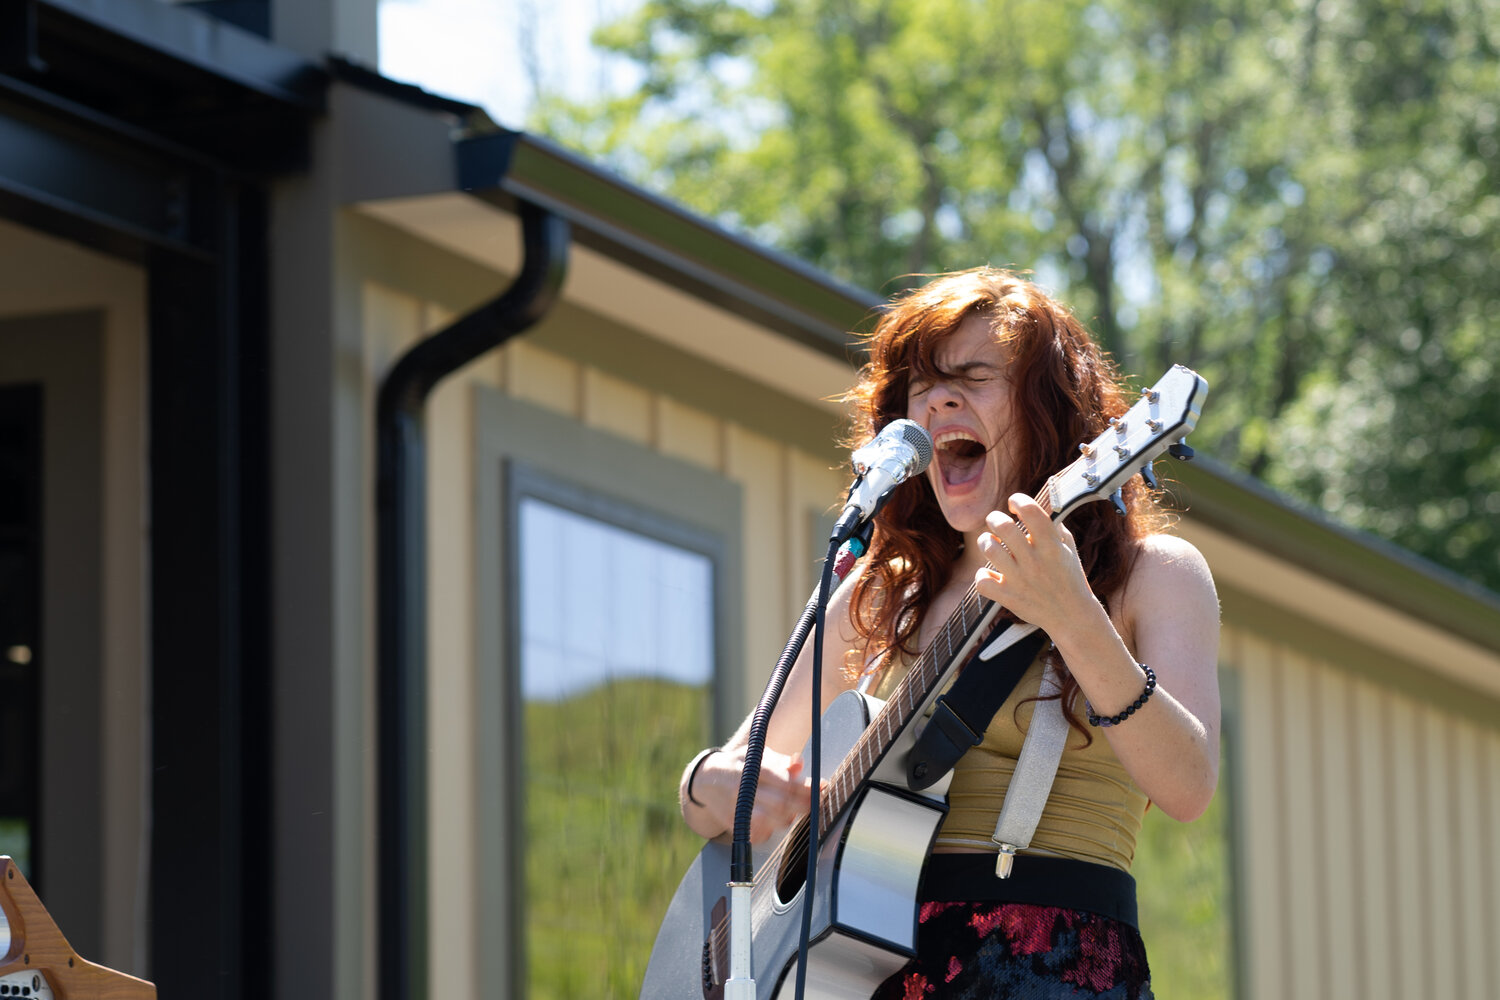 Faith Kelly performs at the first annual Sullivan County Music Festival, June 4, 2022.